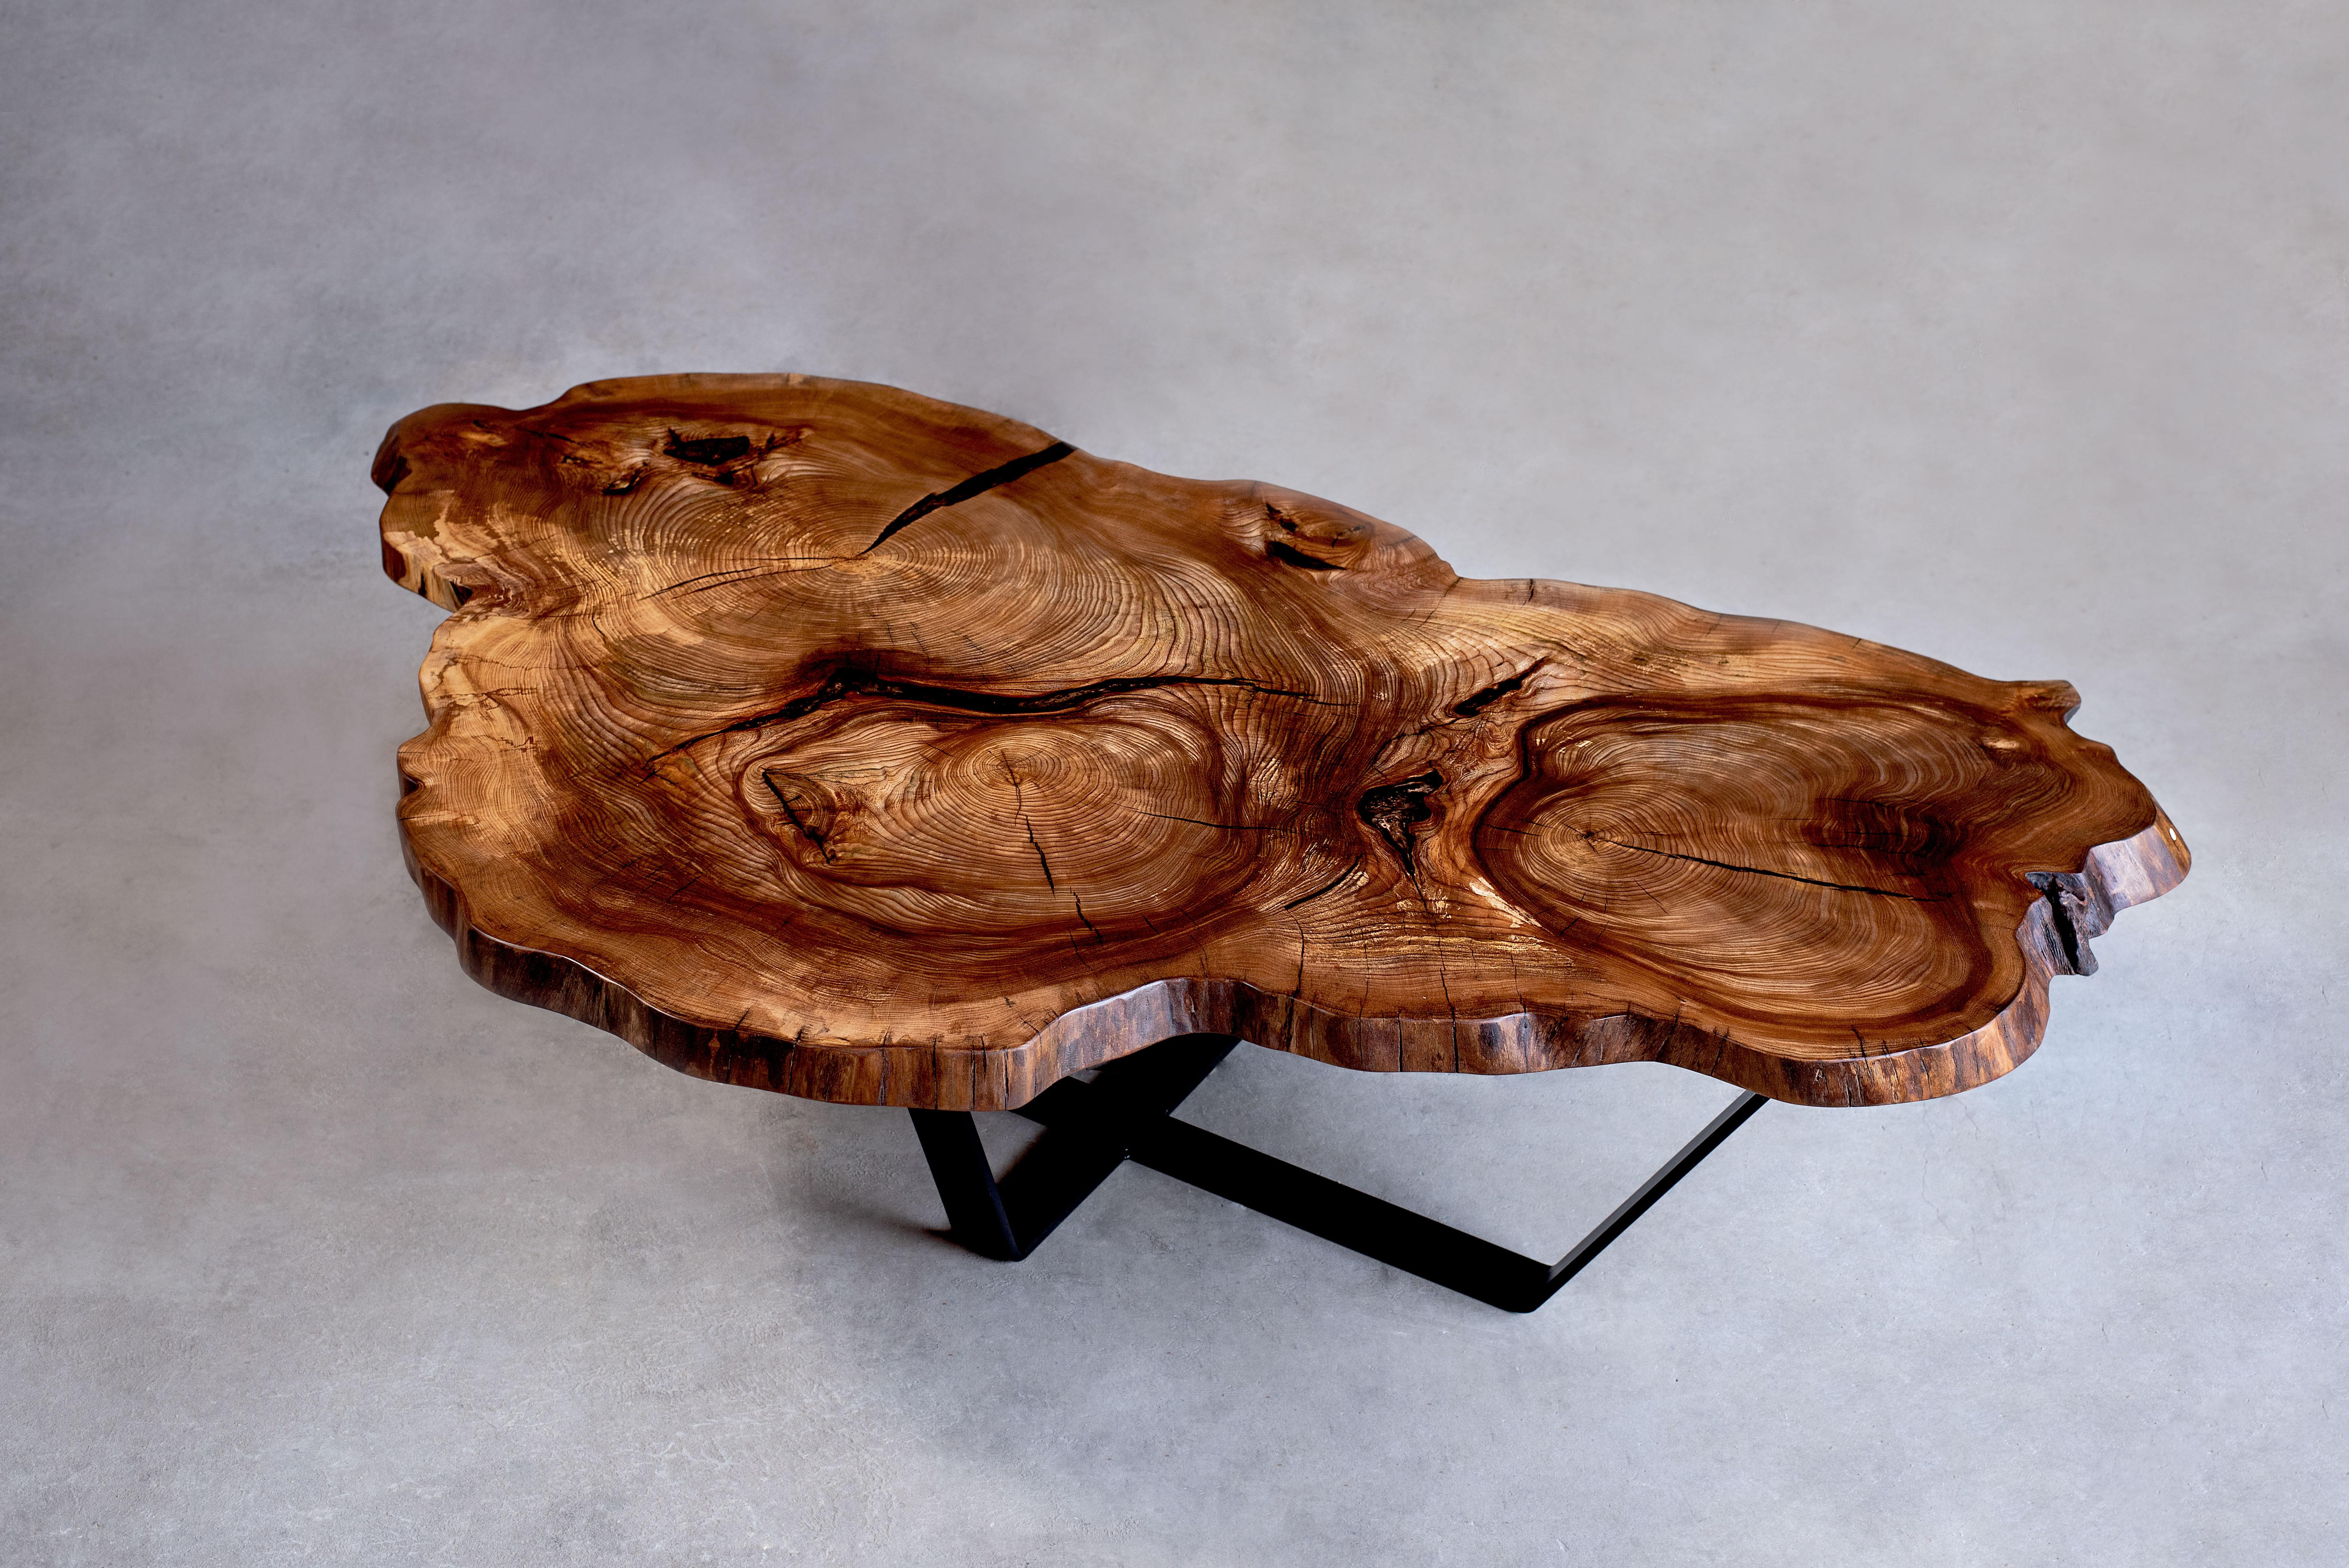 Live edge elm cookie coffee table with a mammoth inlay. The unique shape was formed by three elm trees growing into each other. Black powder-coated base.

The coffee table is available immediately.